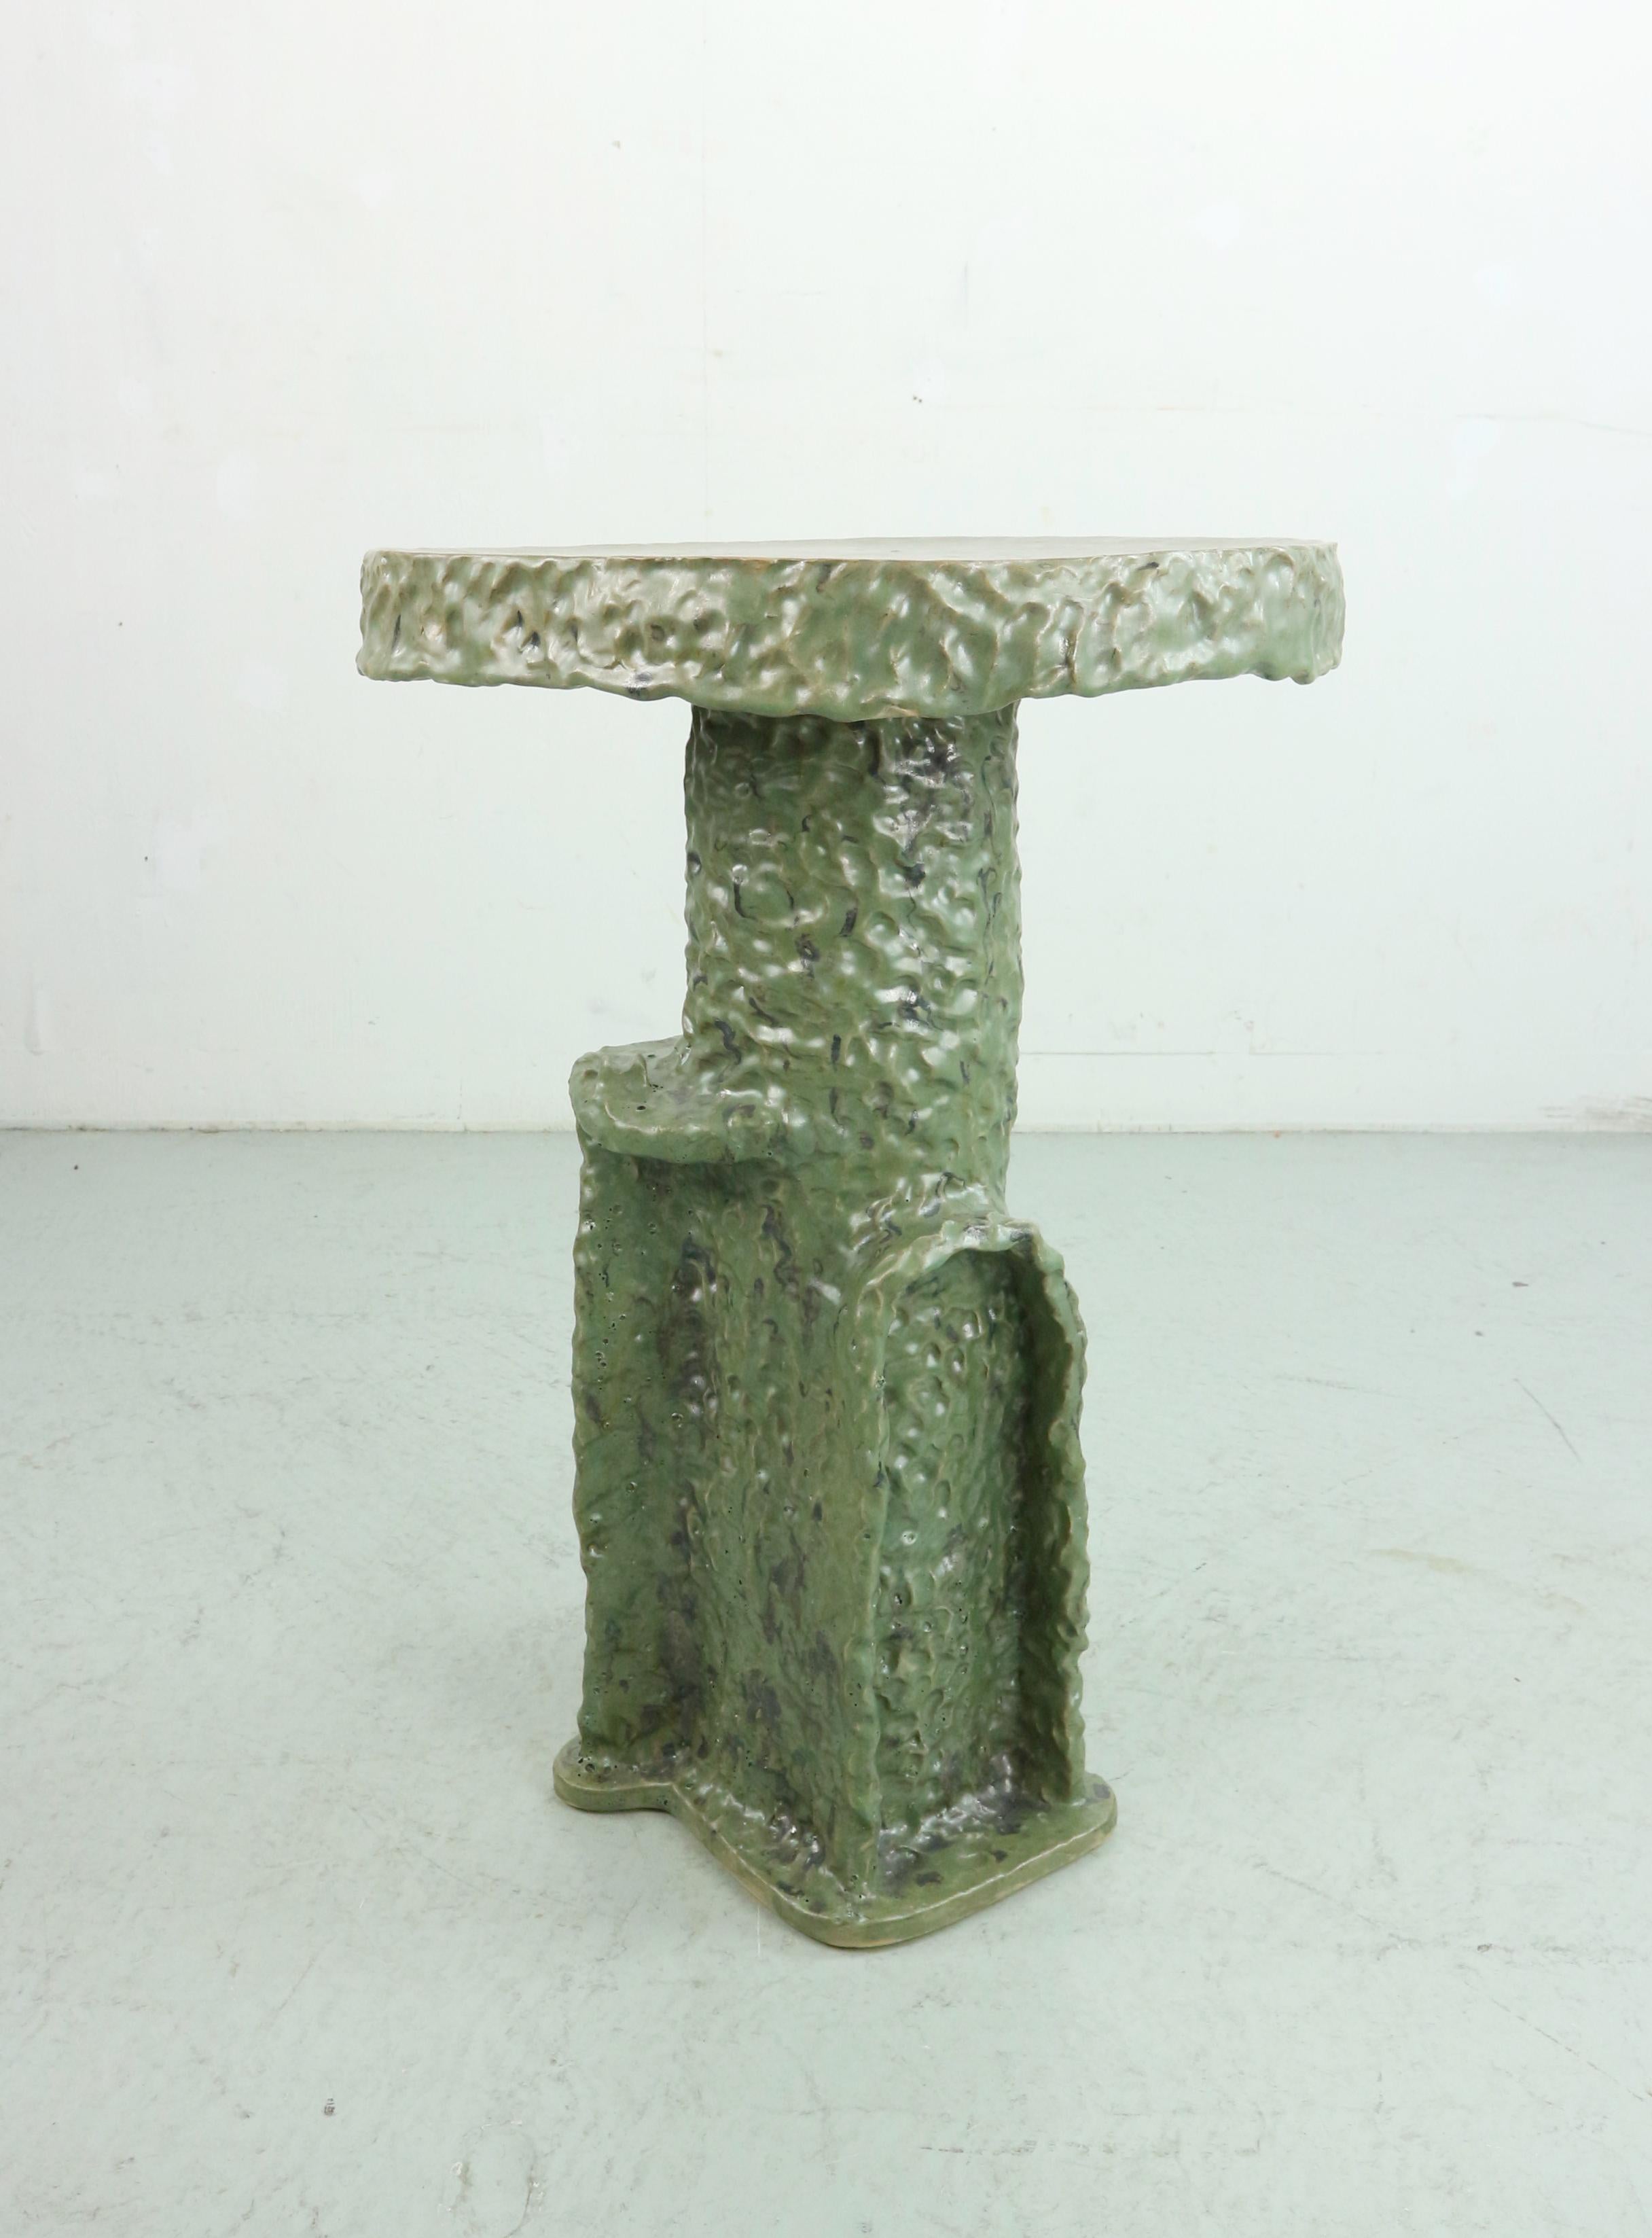 Hand-build stoneware tall side table, leaving fingerprints of the artist to emphasise on the handmade character. 

The piece is a one-off and signed by the artist.

The stoneware side table can be used outside and has a bold  green glaze with black